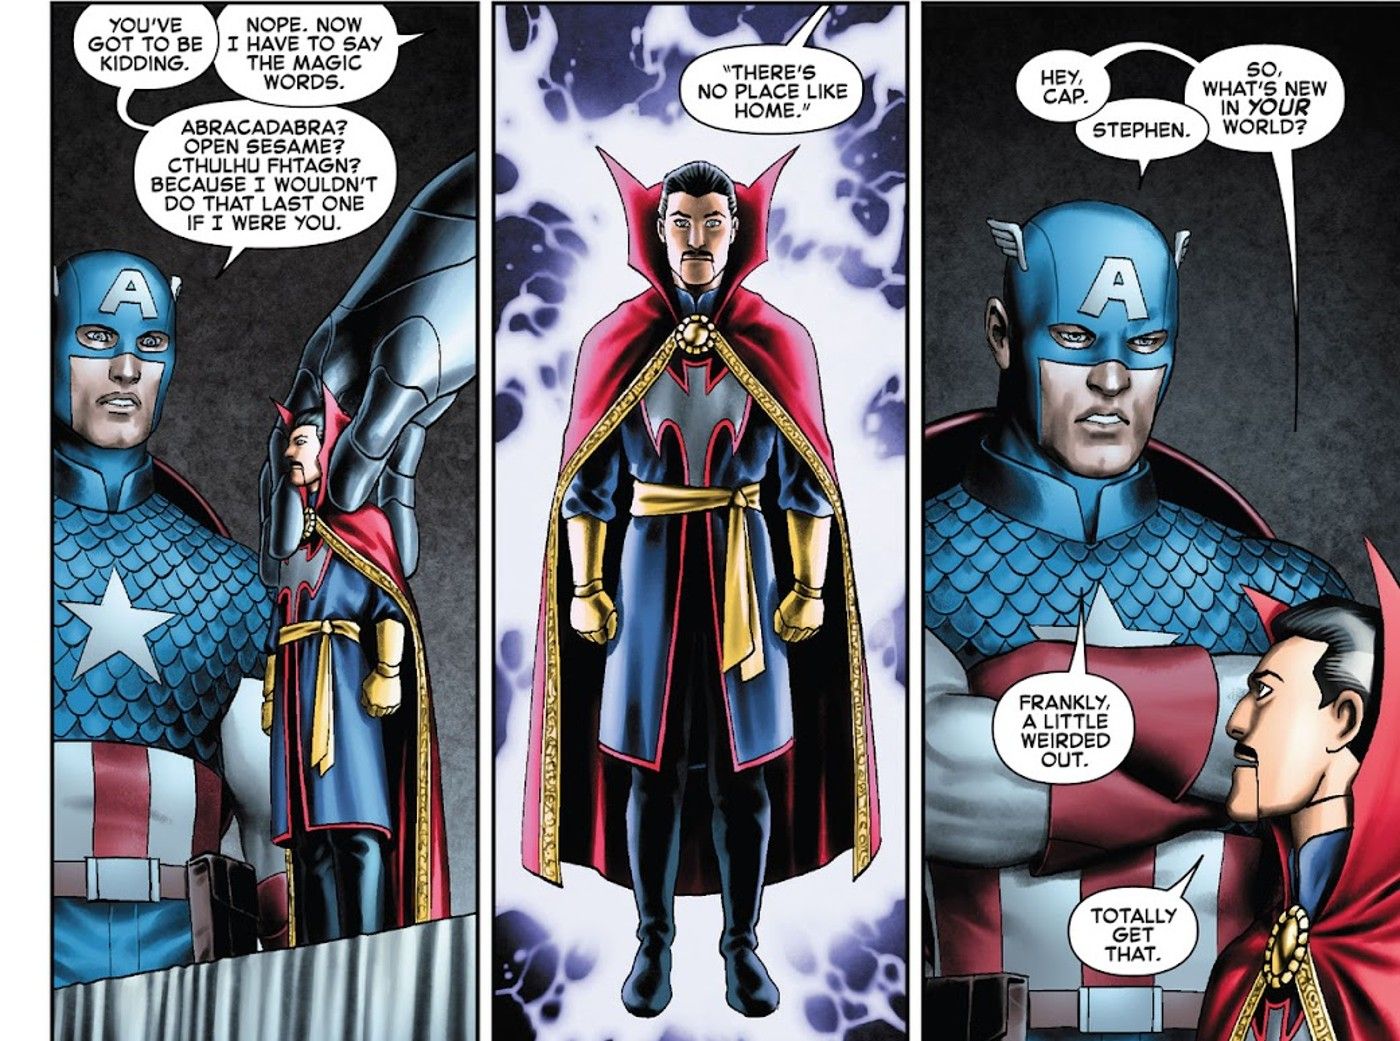 panels from Captain America #3, Doctor Strange talks to Captain America as a doll